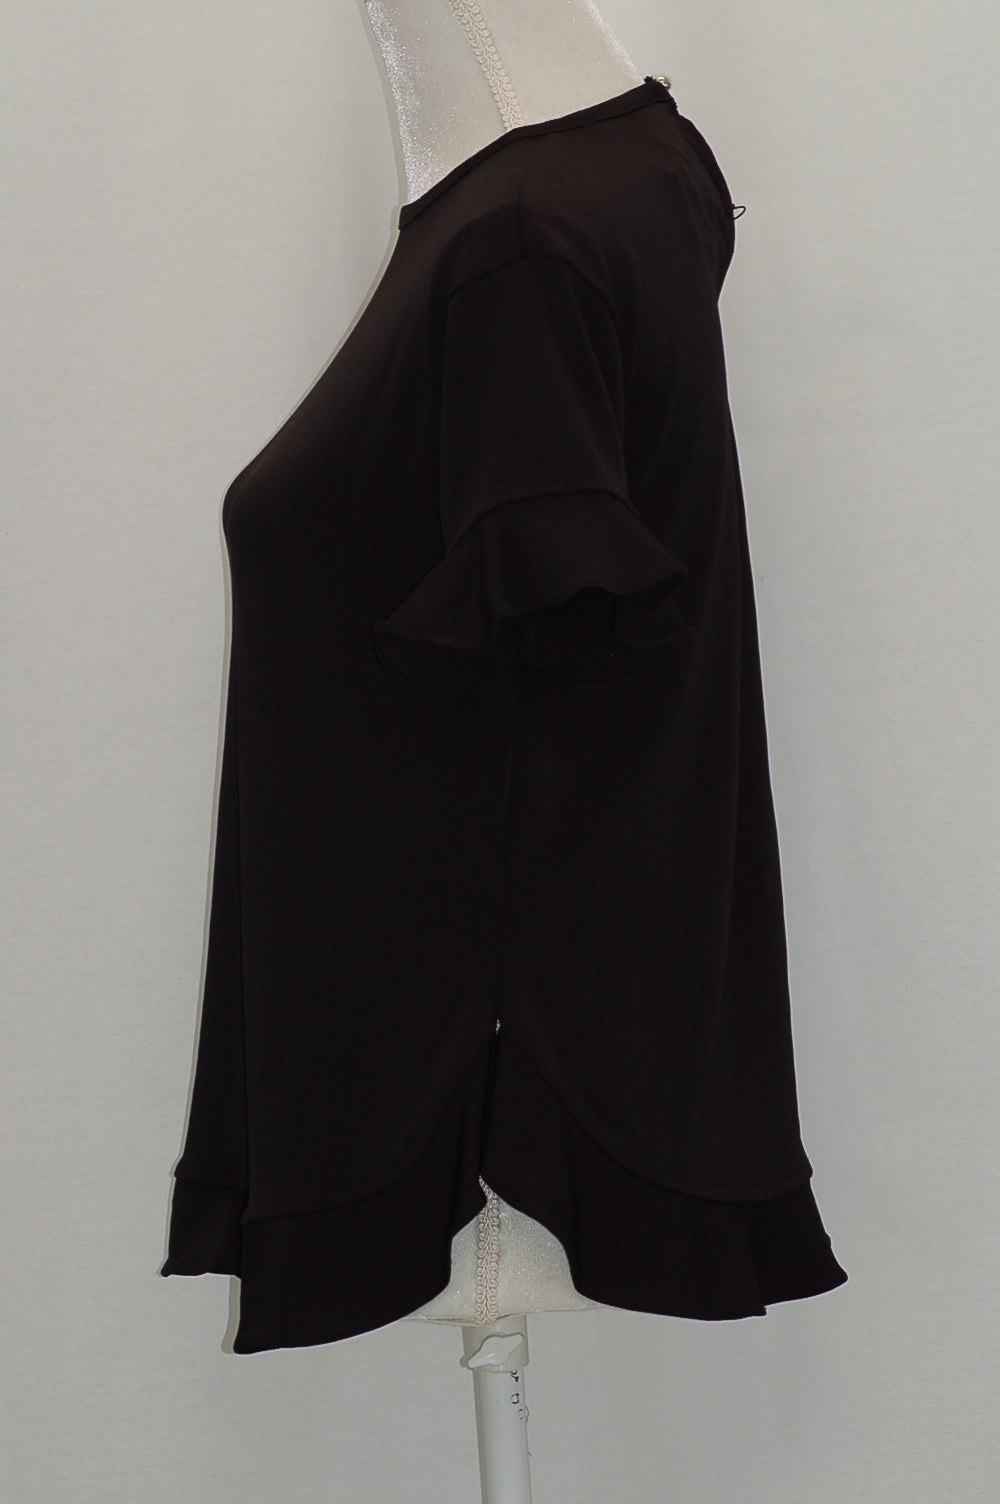 Cable Gauge Ruffled Top Black XS